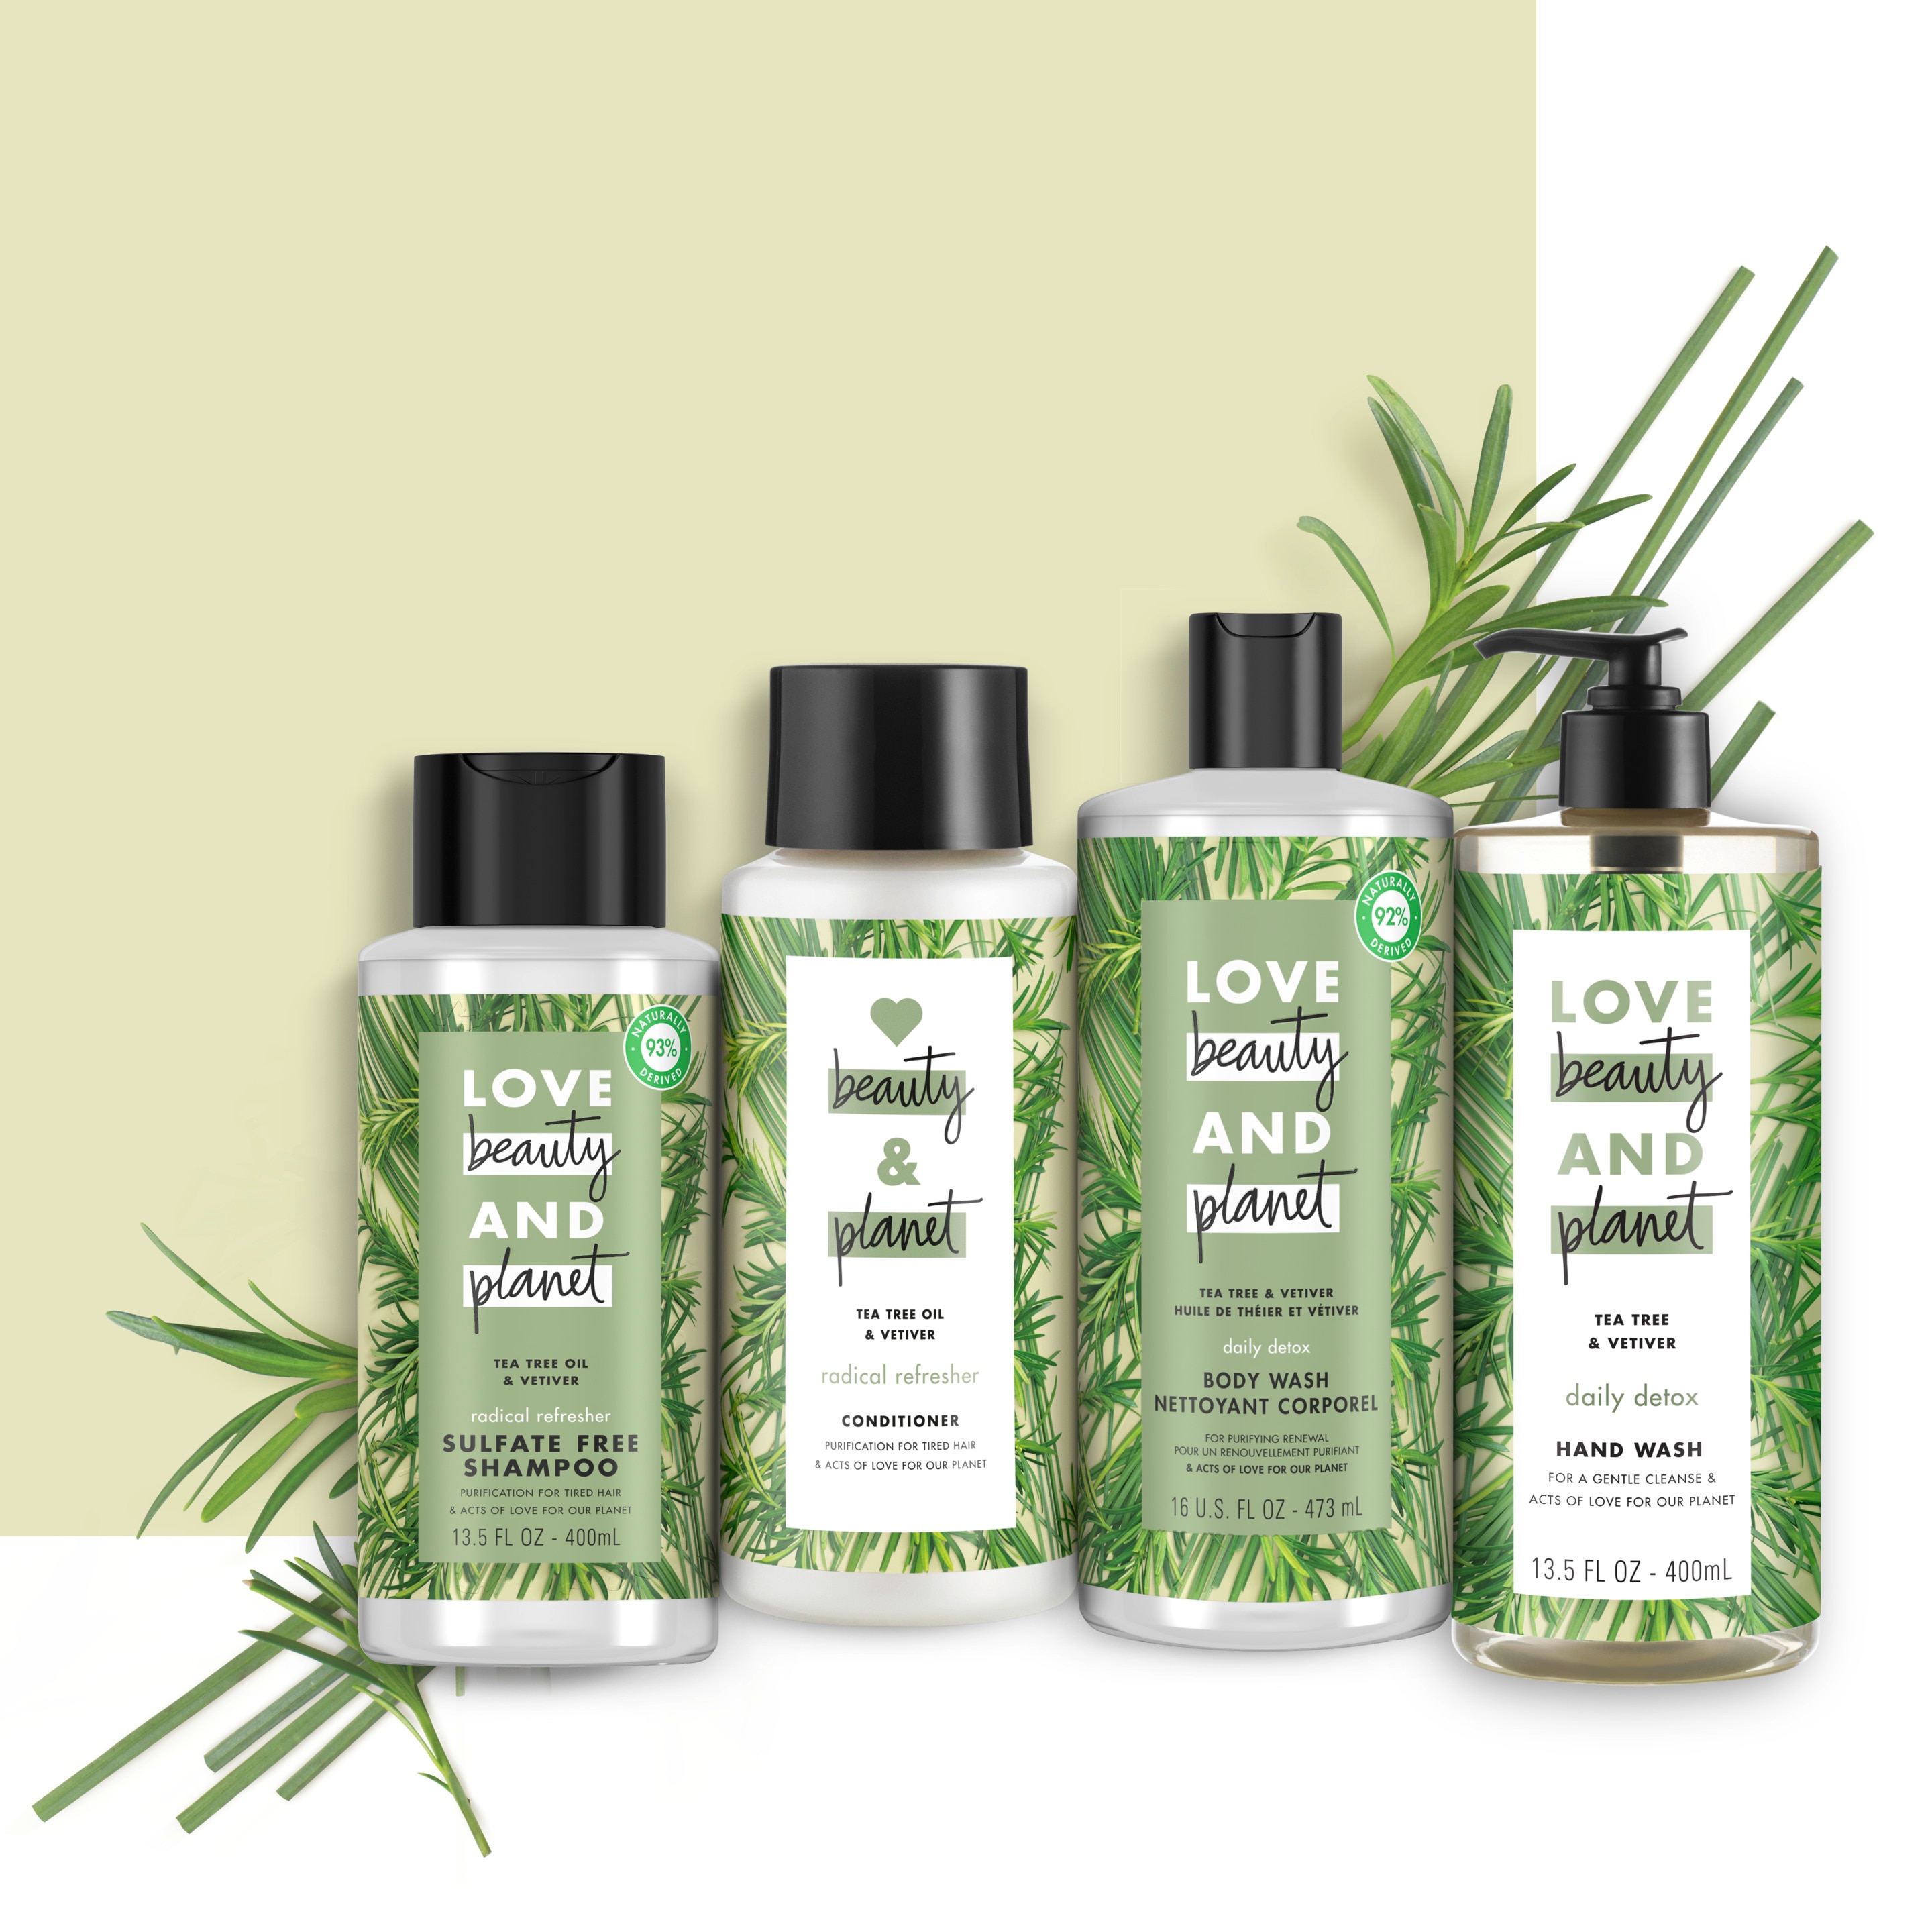 Tea Tree oil and vetiver